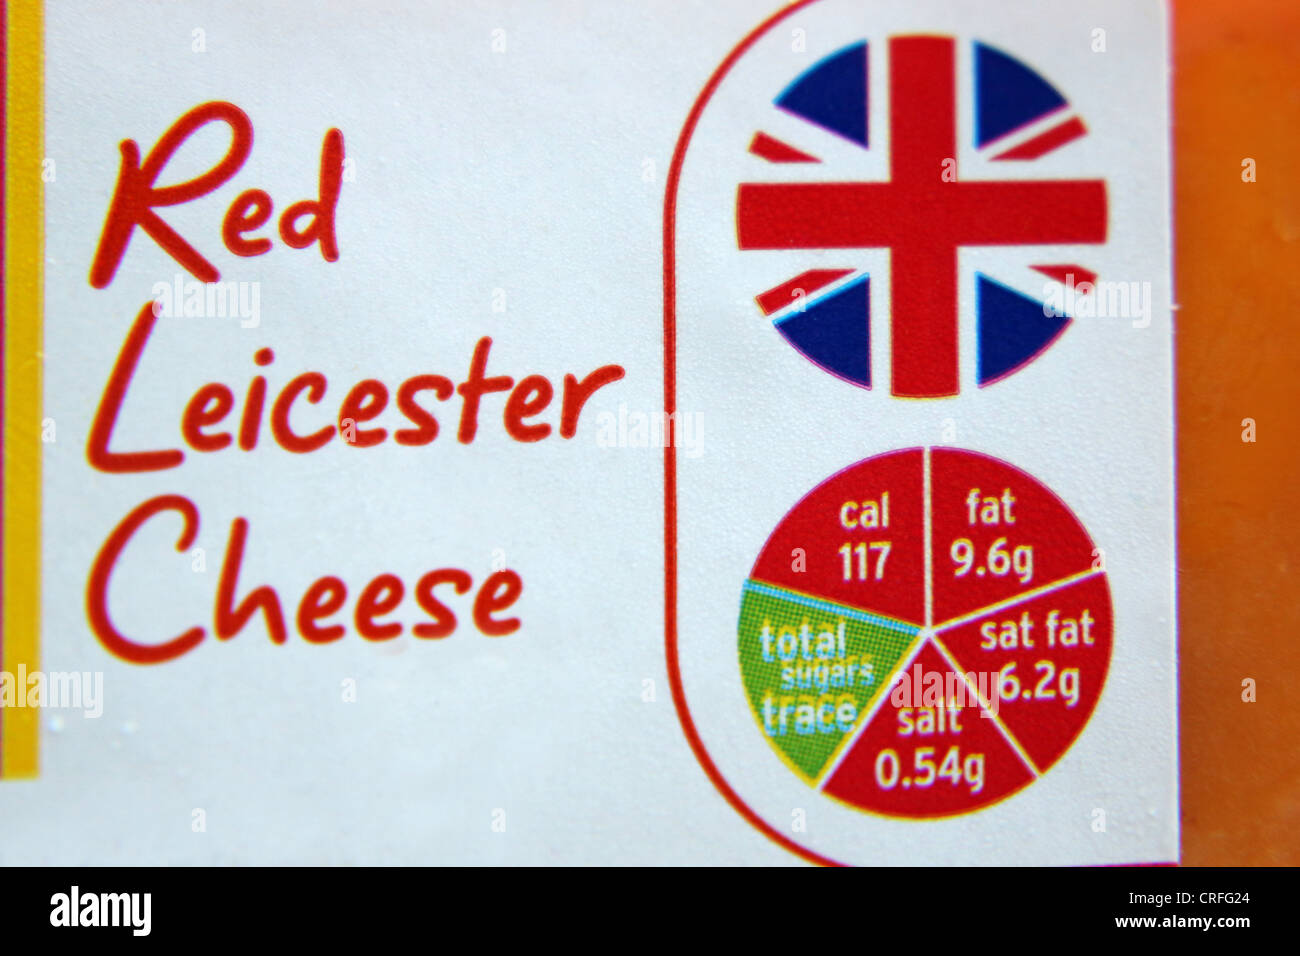 Packaging Of Red Leicester Cheese Showing Calories, Fat, Saturated Fat, Sugars And Salt In A Traffic Light System Stock Photo